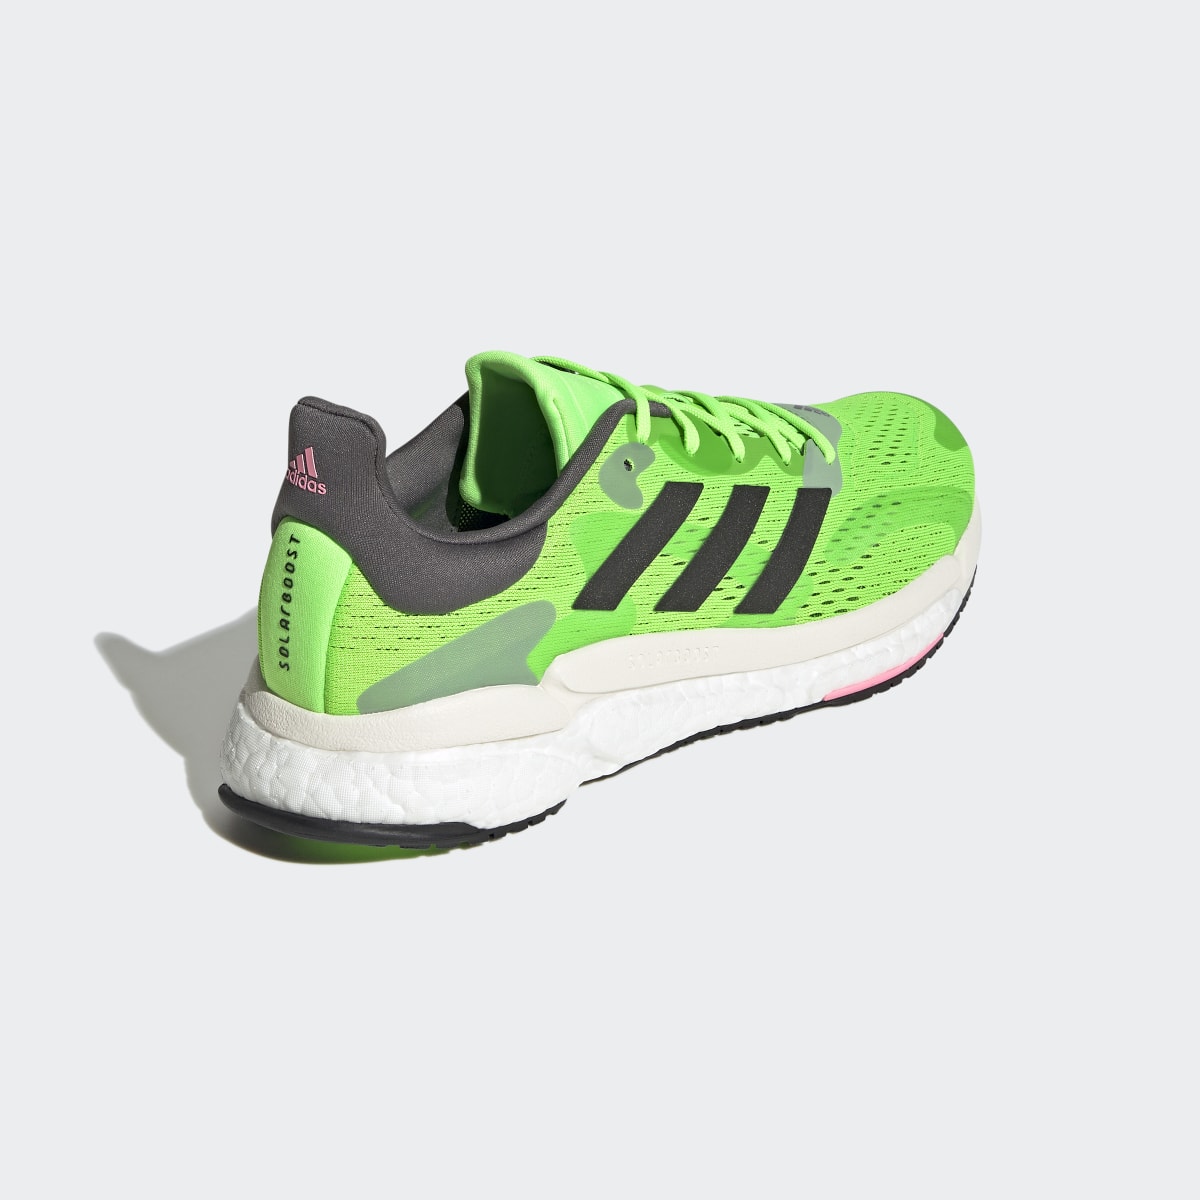 Adidas Solarboost 4 Shoes. 6